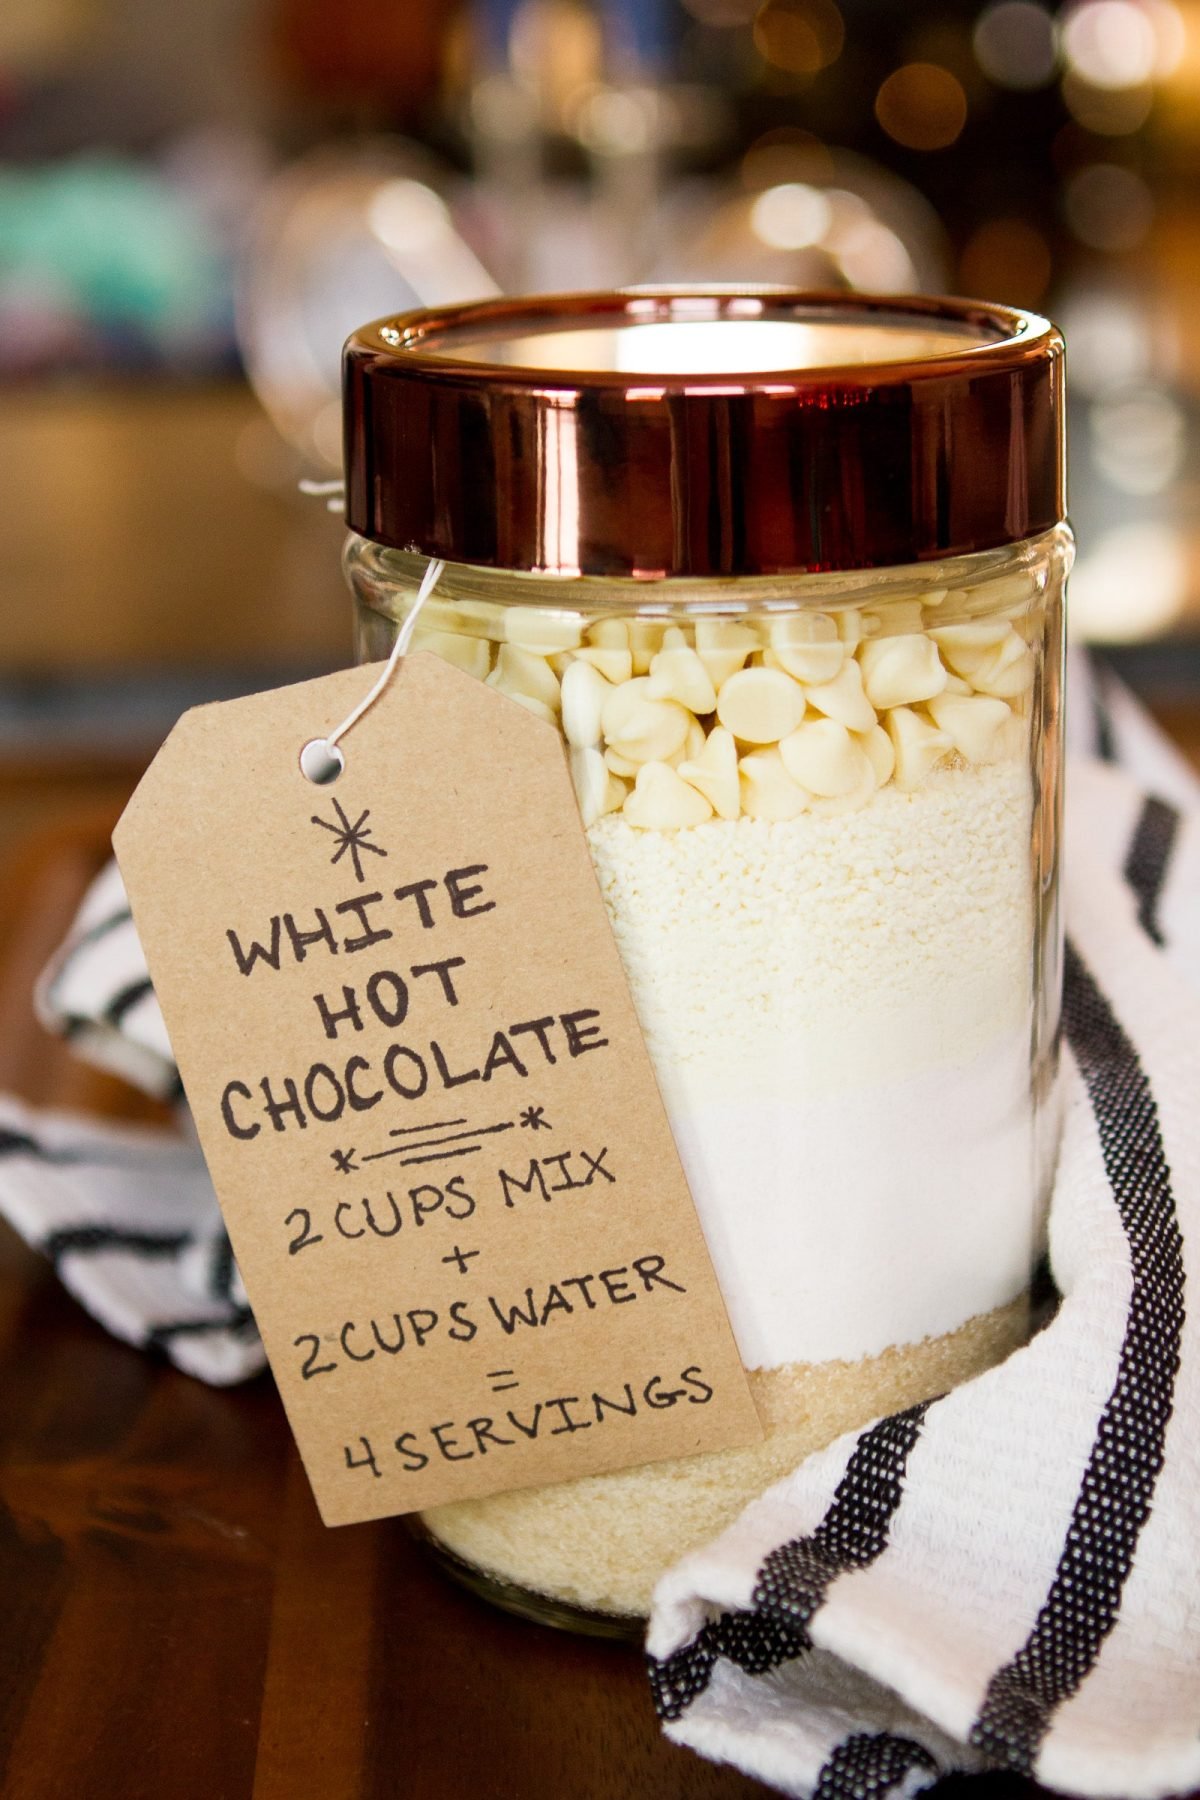 White Hot Chocolate Mix -- a new twist on the classic mason jar gift idea, this tasty white hot chocolate mix is layered in a gorgeous glass storage jar with copper-colored lid from At Home… Perfect as a teacher gift, thank you gift, hostess gift, etc! | via @unsophisticook on unsophisticook.com